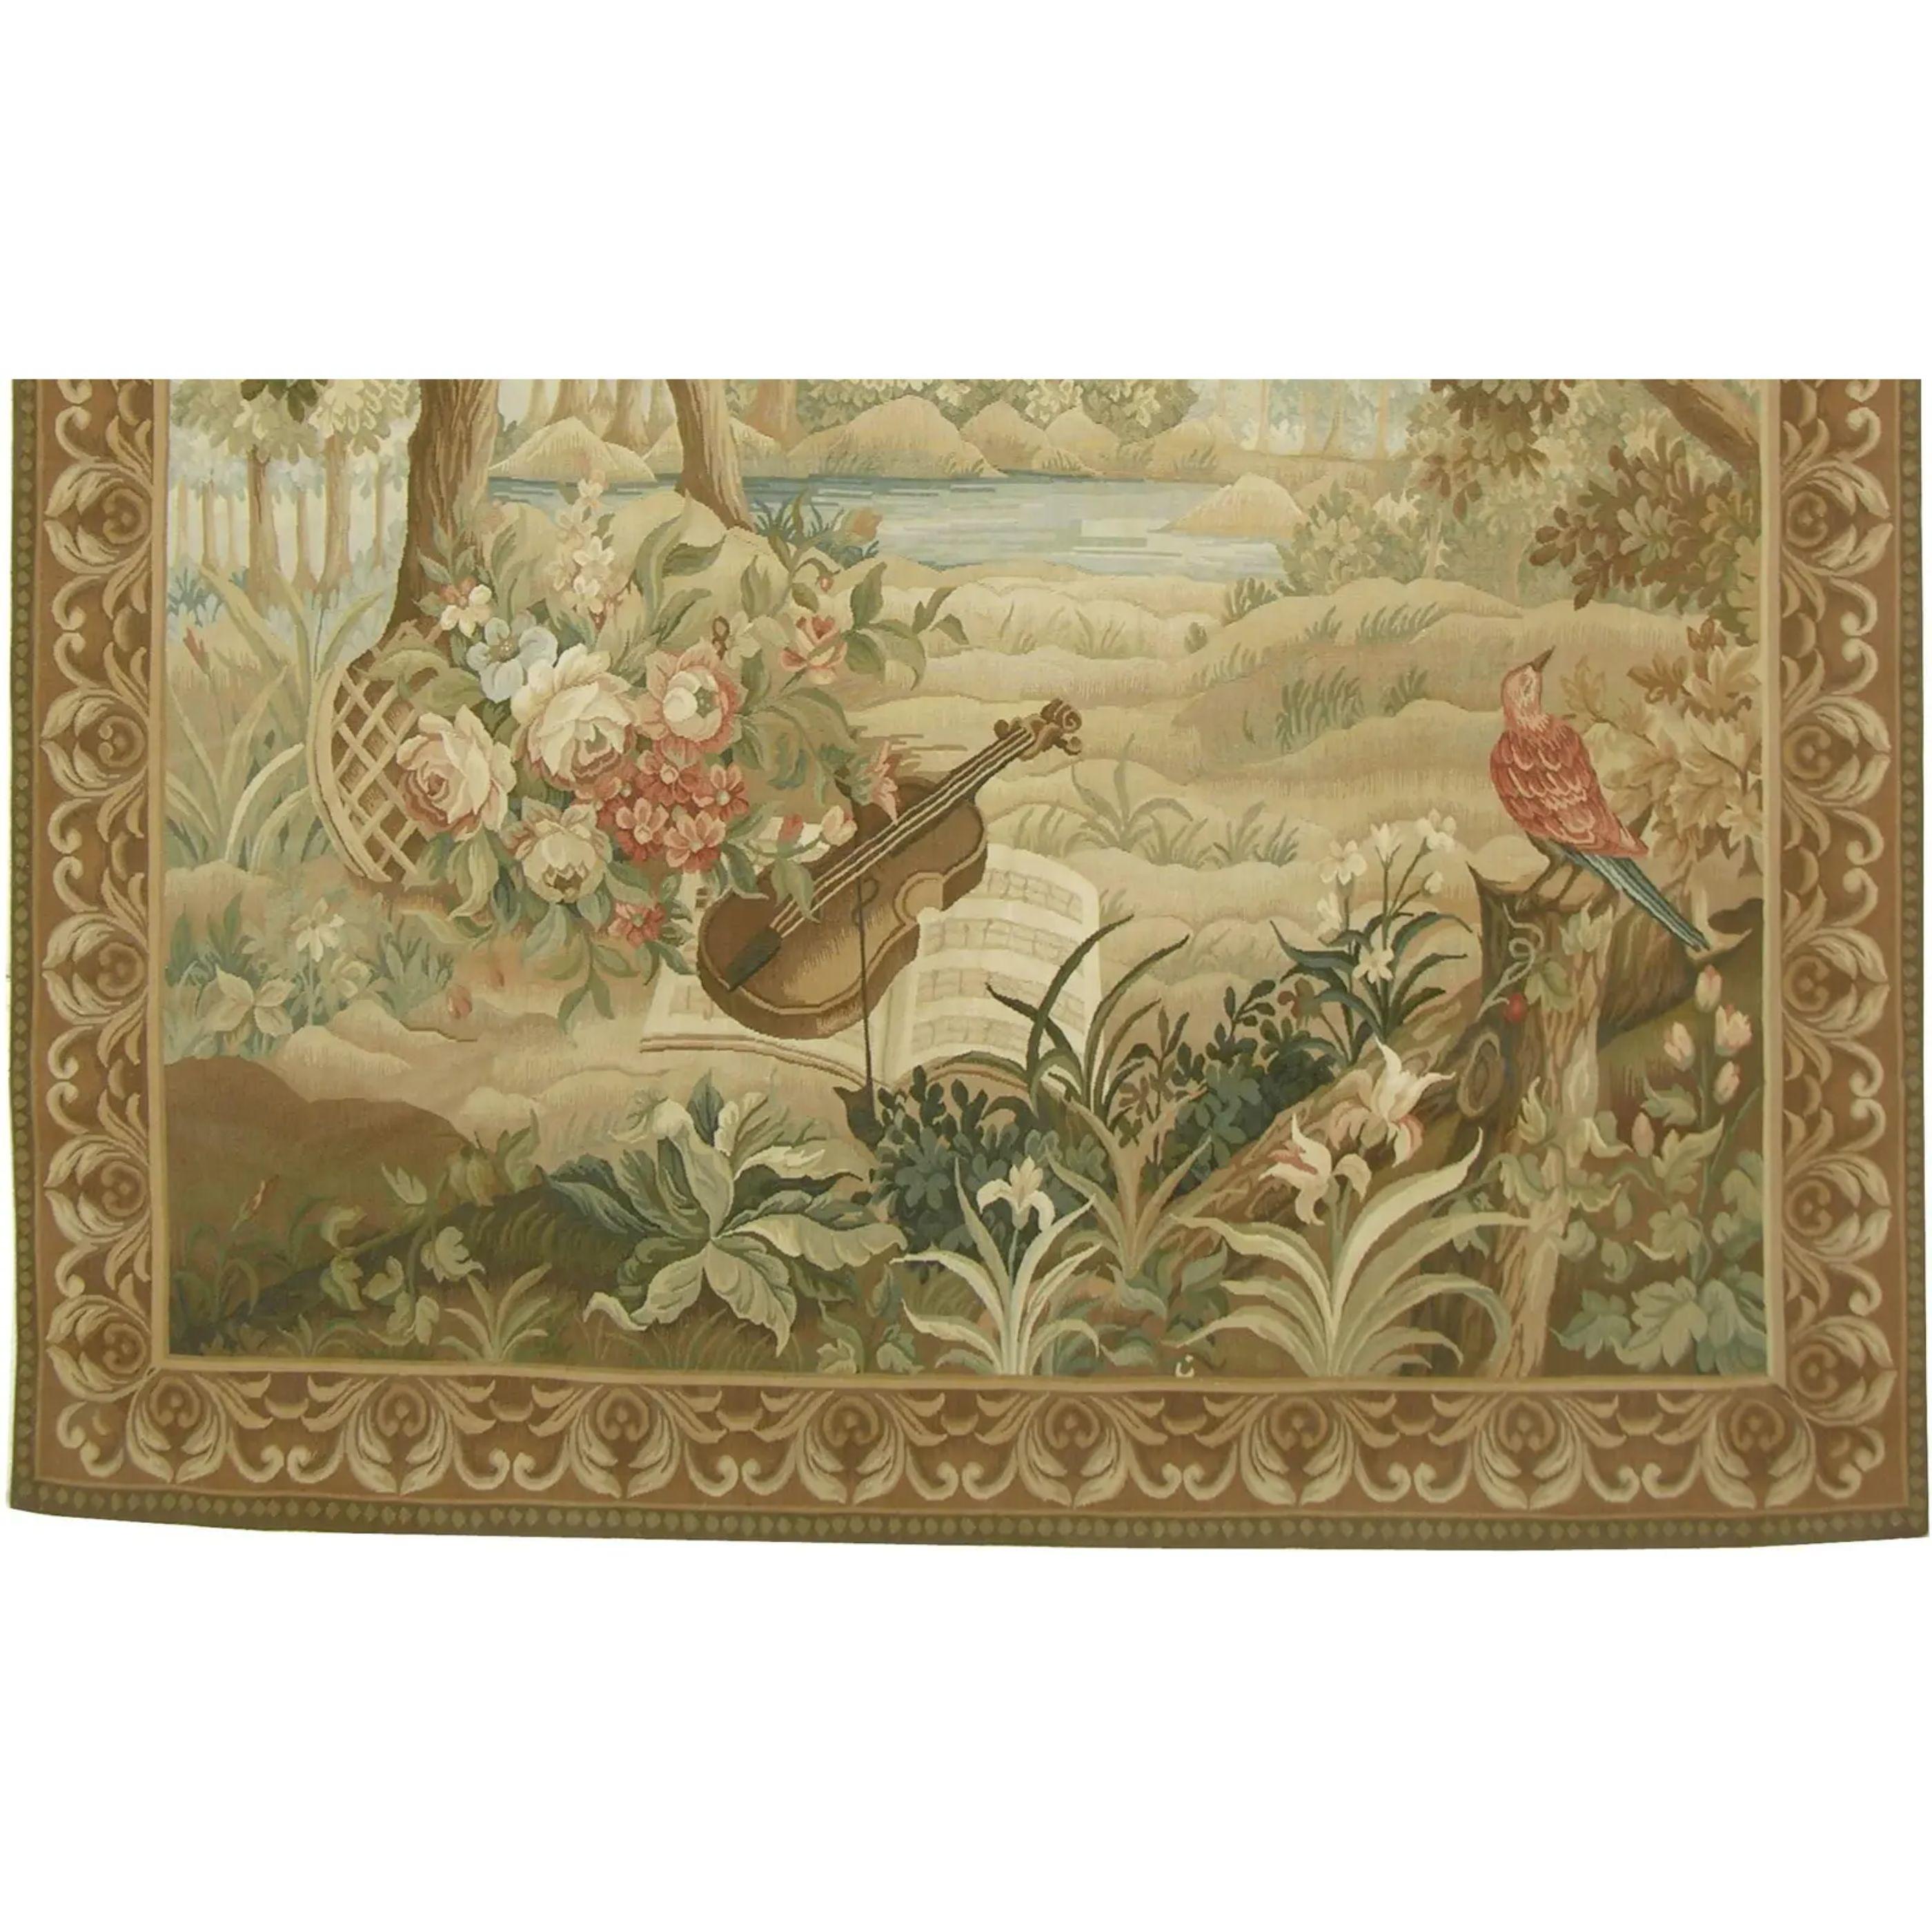 Unknown Vintage Tapestry Depicting a Cello 6.0X5.5 For Sale